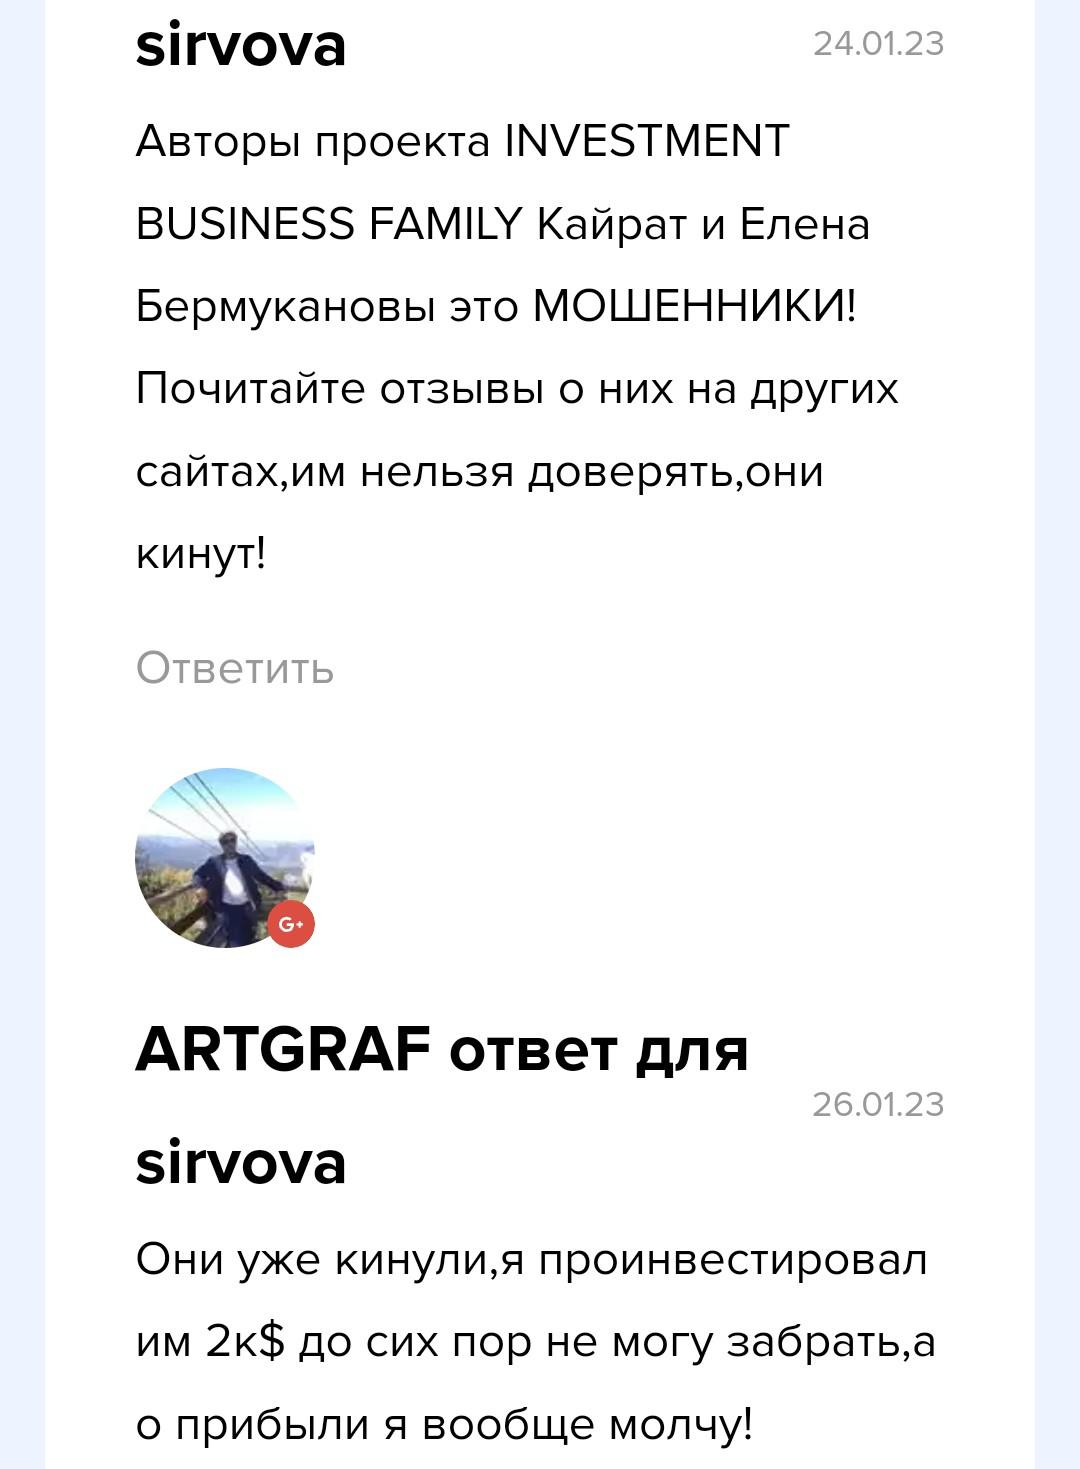 Investment Business Family отзывы